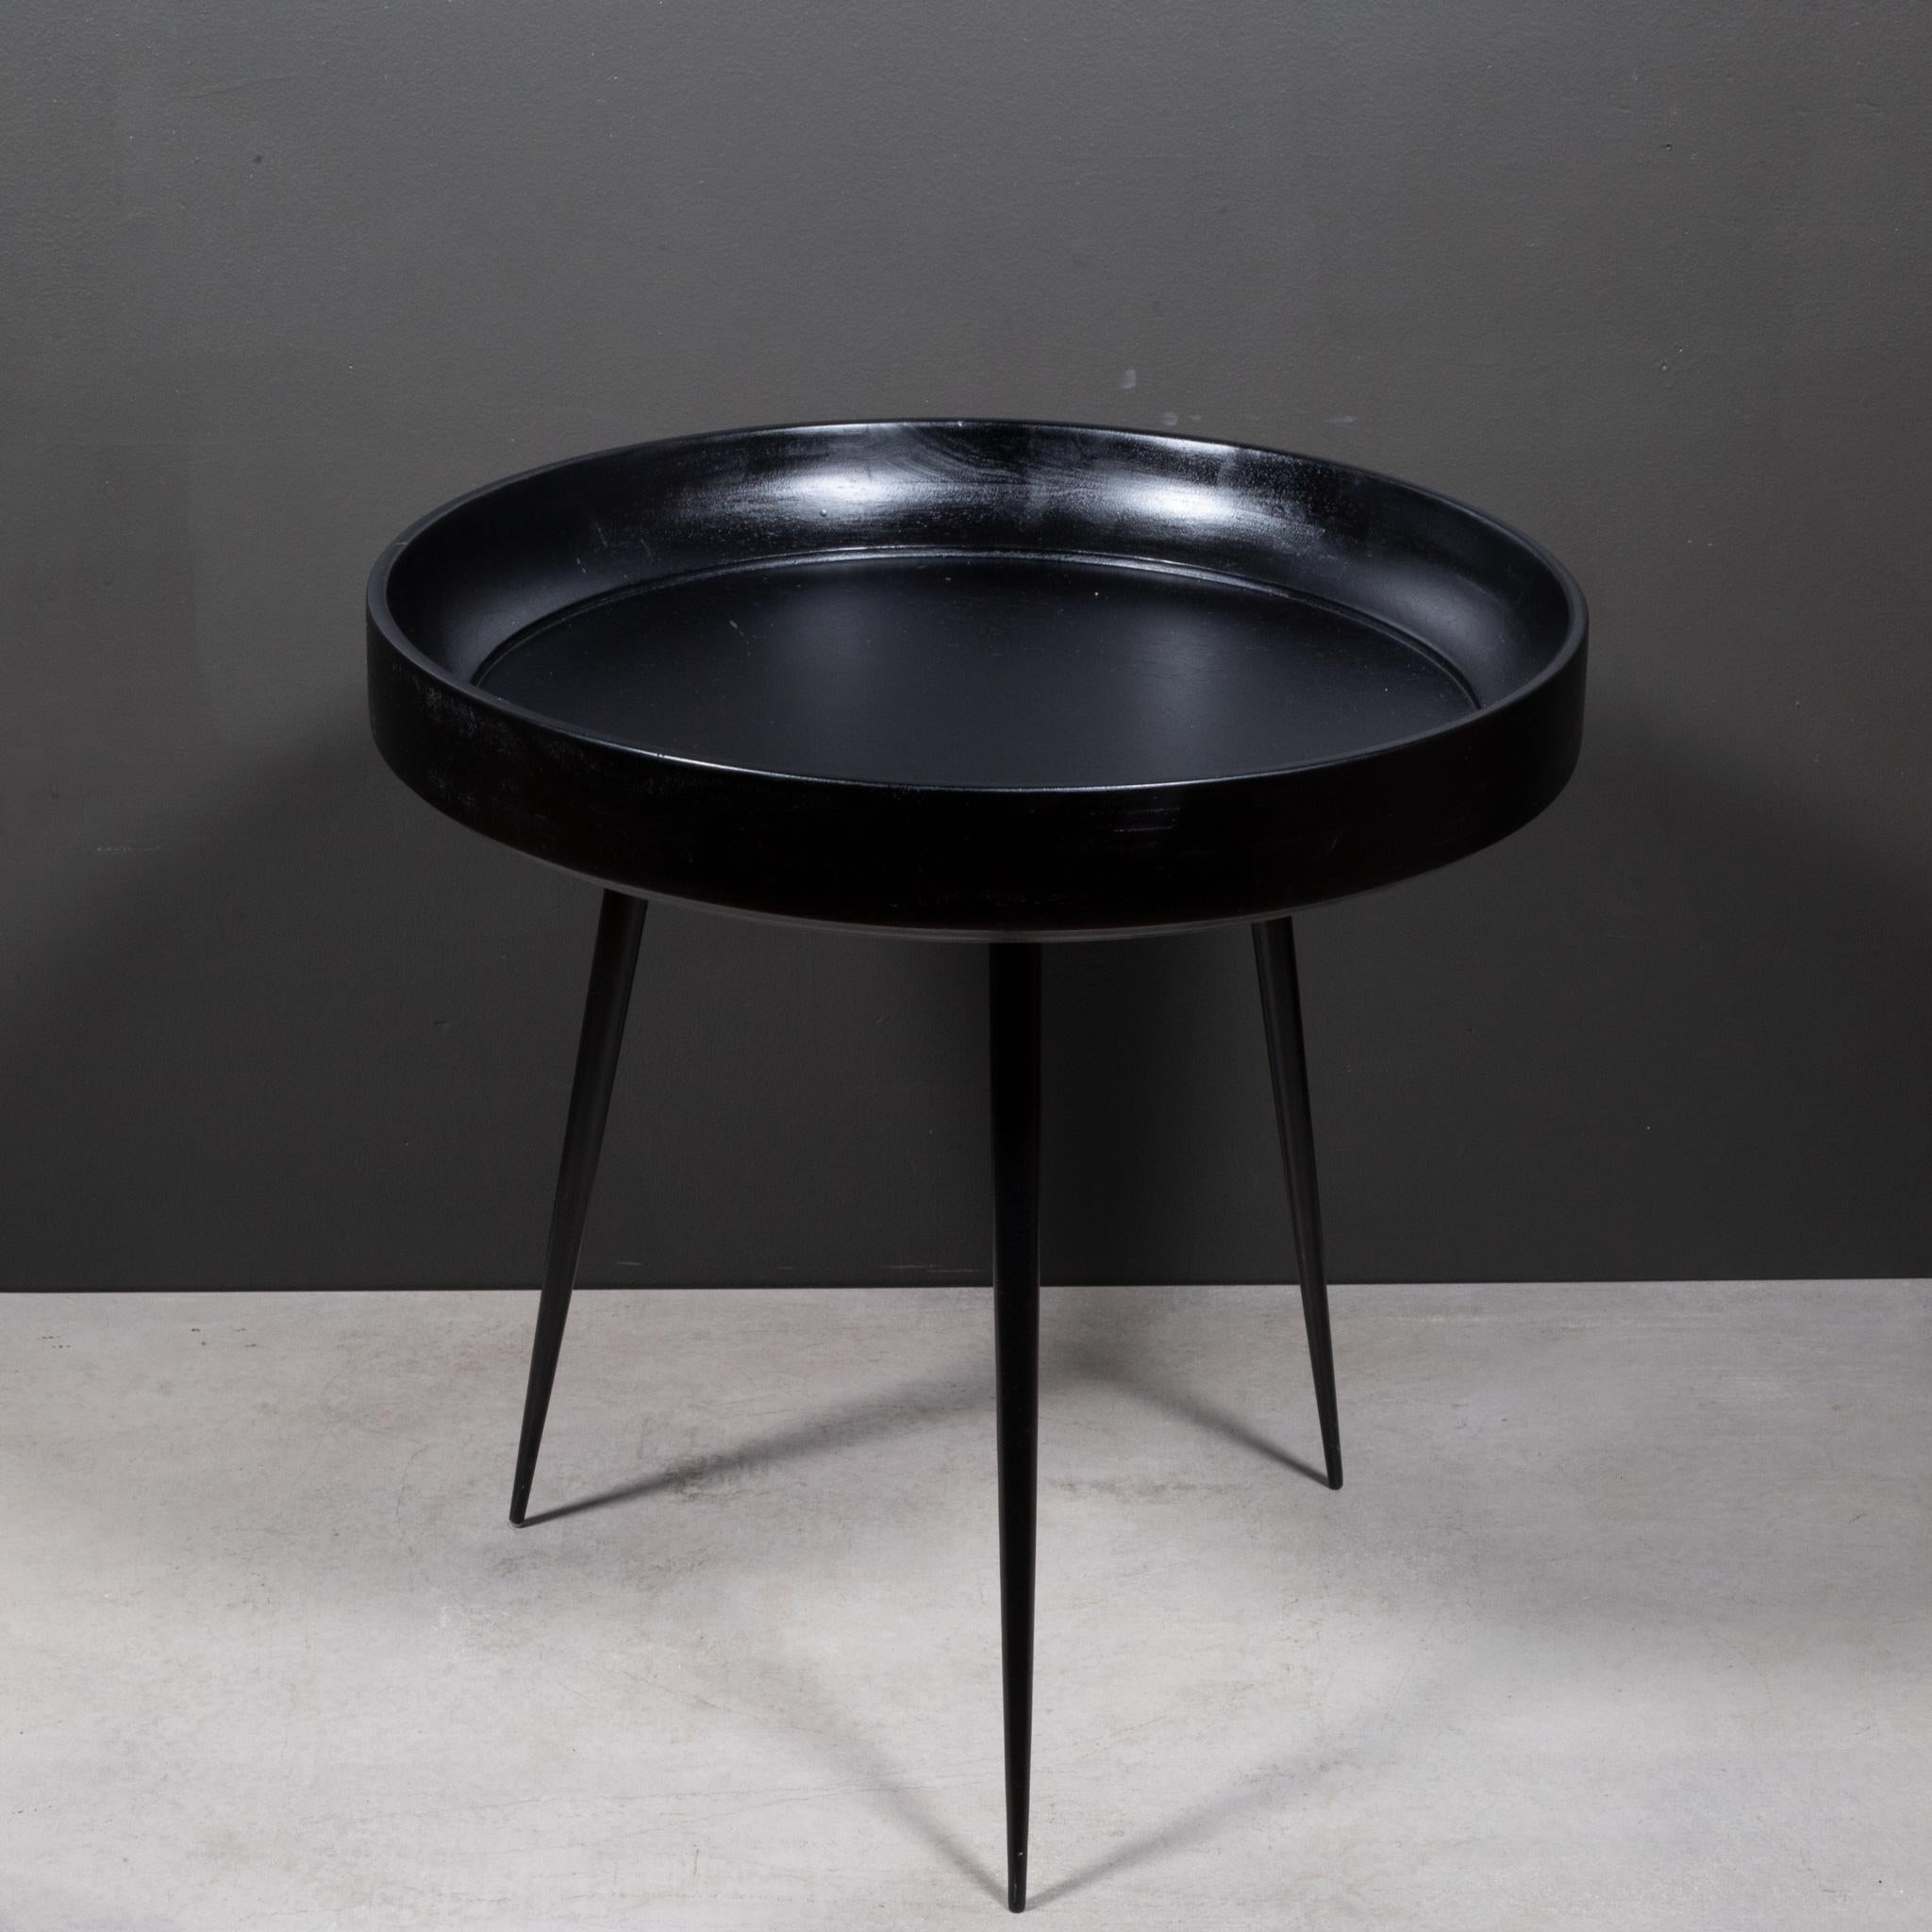 Contemporary Medium Bowl Side Table in Black by Mater